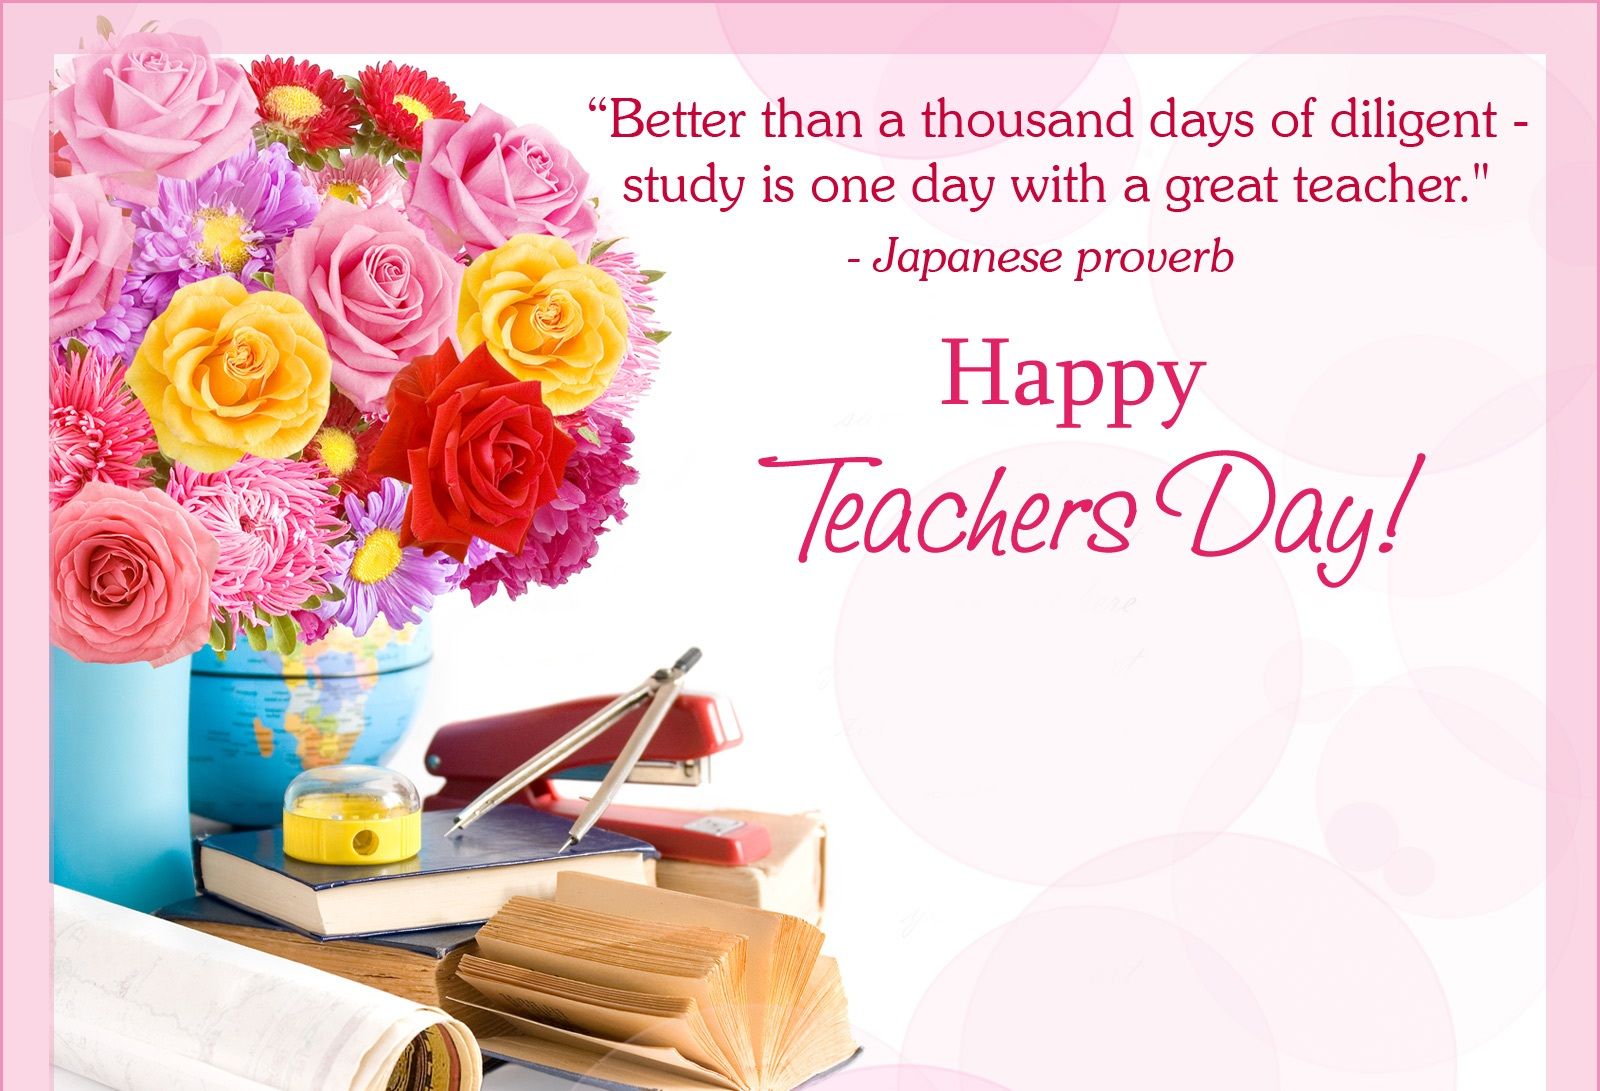 Happy Teachers Day HD Image, Wallpaper, Pics, and Photo (Free Download)